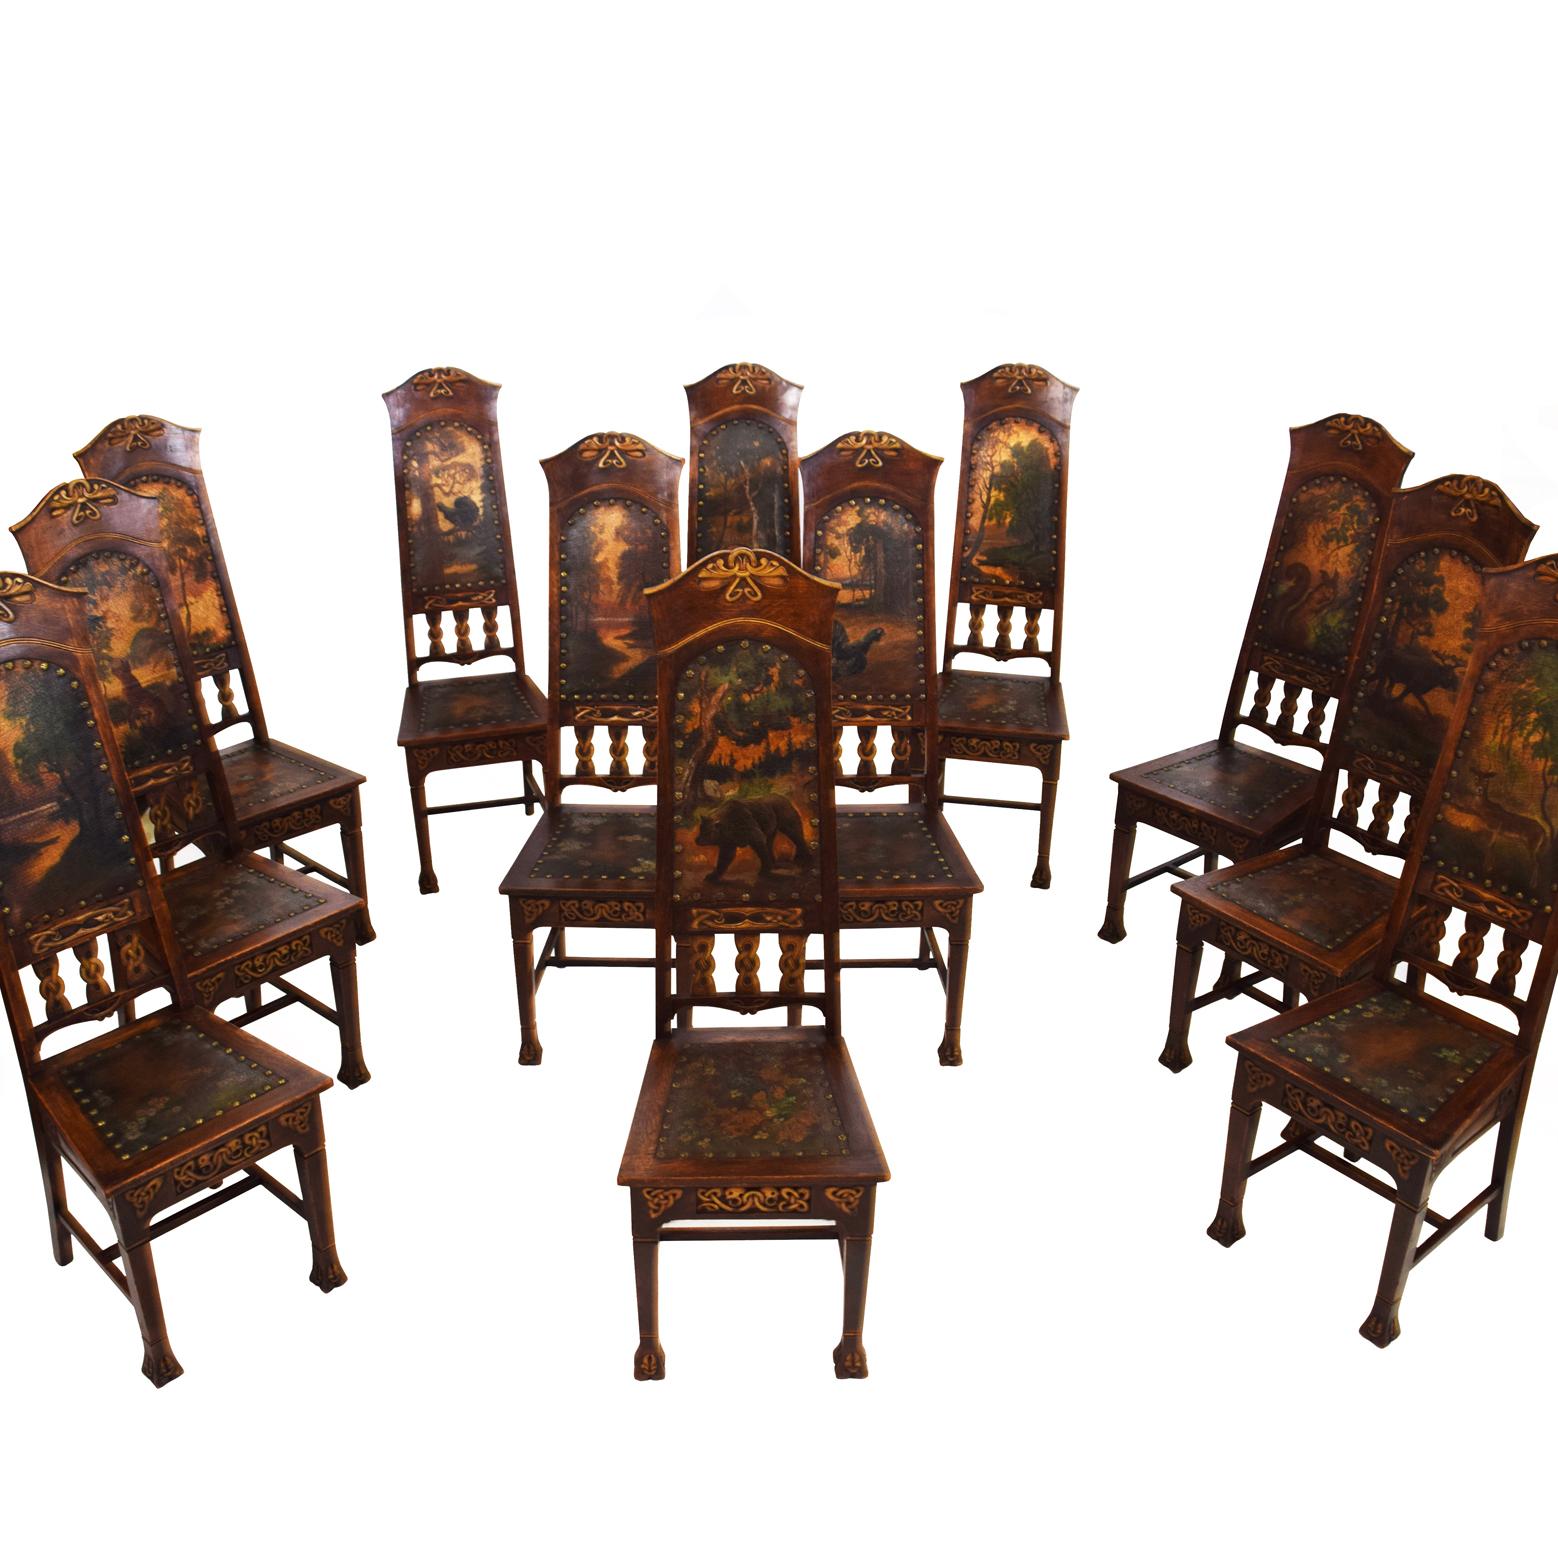 This is an extraordinary set of 12 Art Nouveaux dining chairs from Sweden, in solid oak, covered in hand-painted leather each one featuring a different animal in a natural setting on front and back. The leather is in excellent original condition and